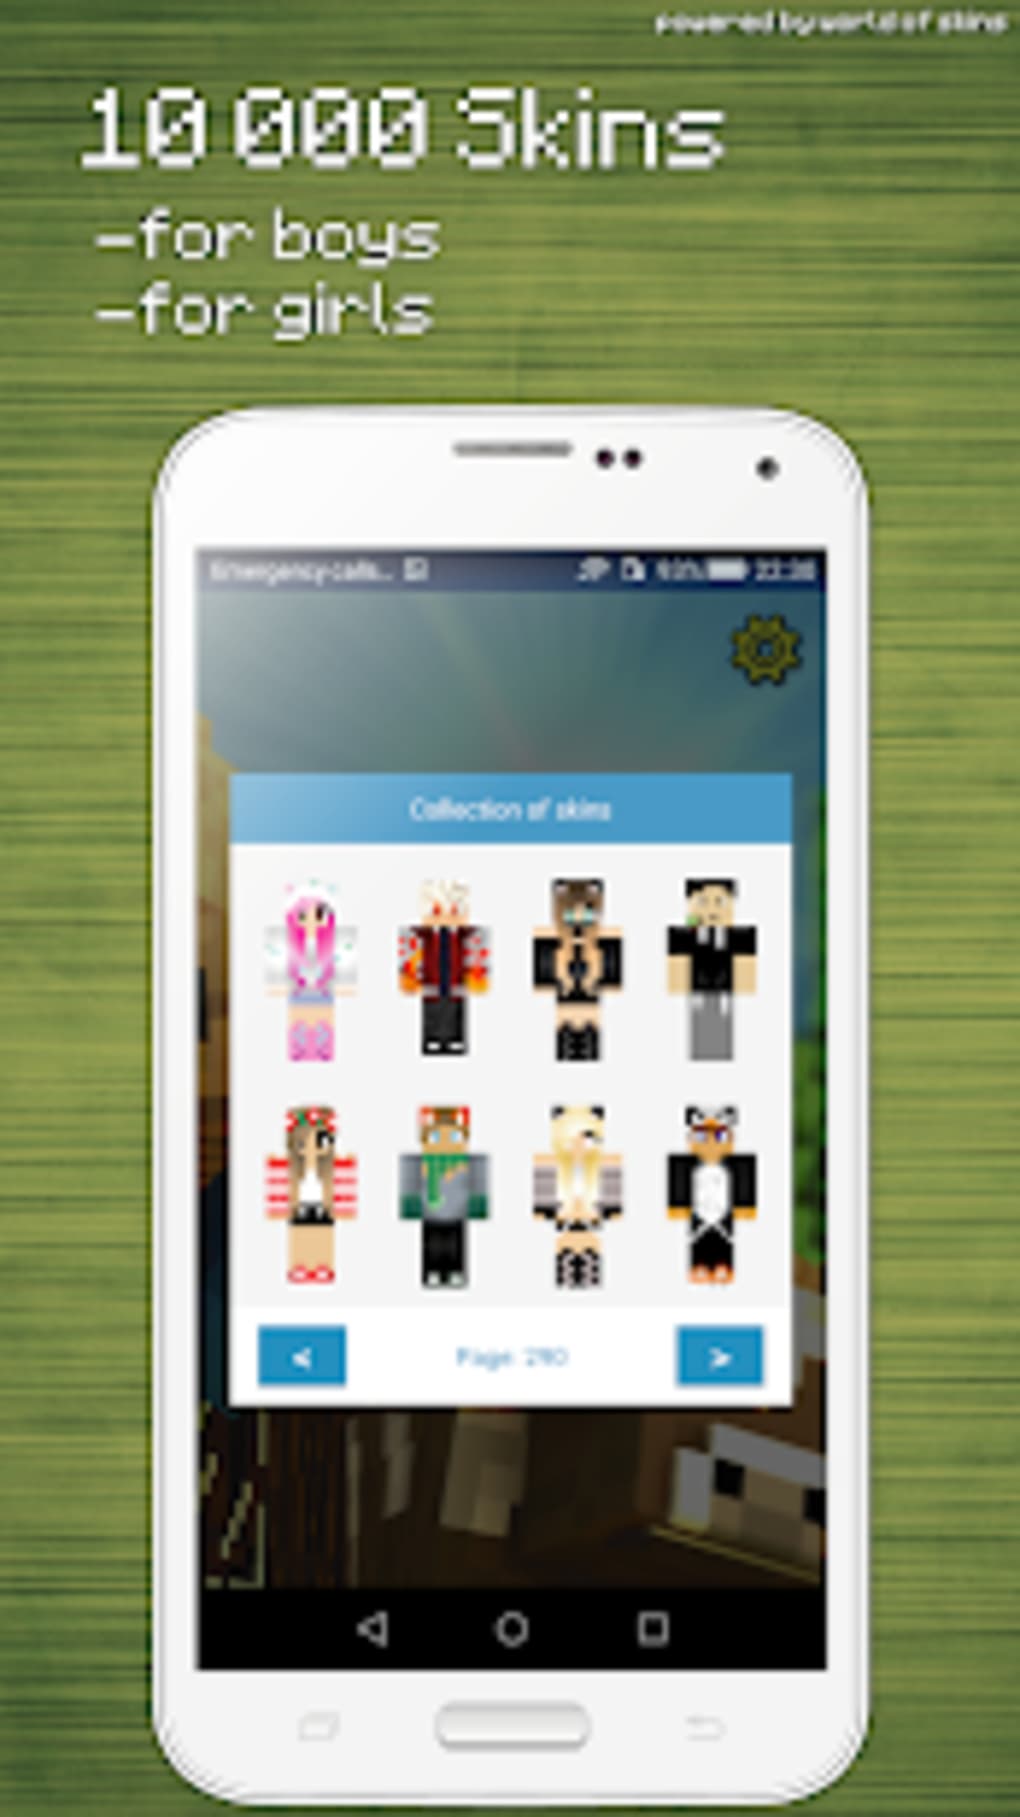 Skin Editor for Minecraft APK for Android - Download